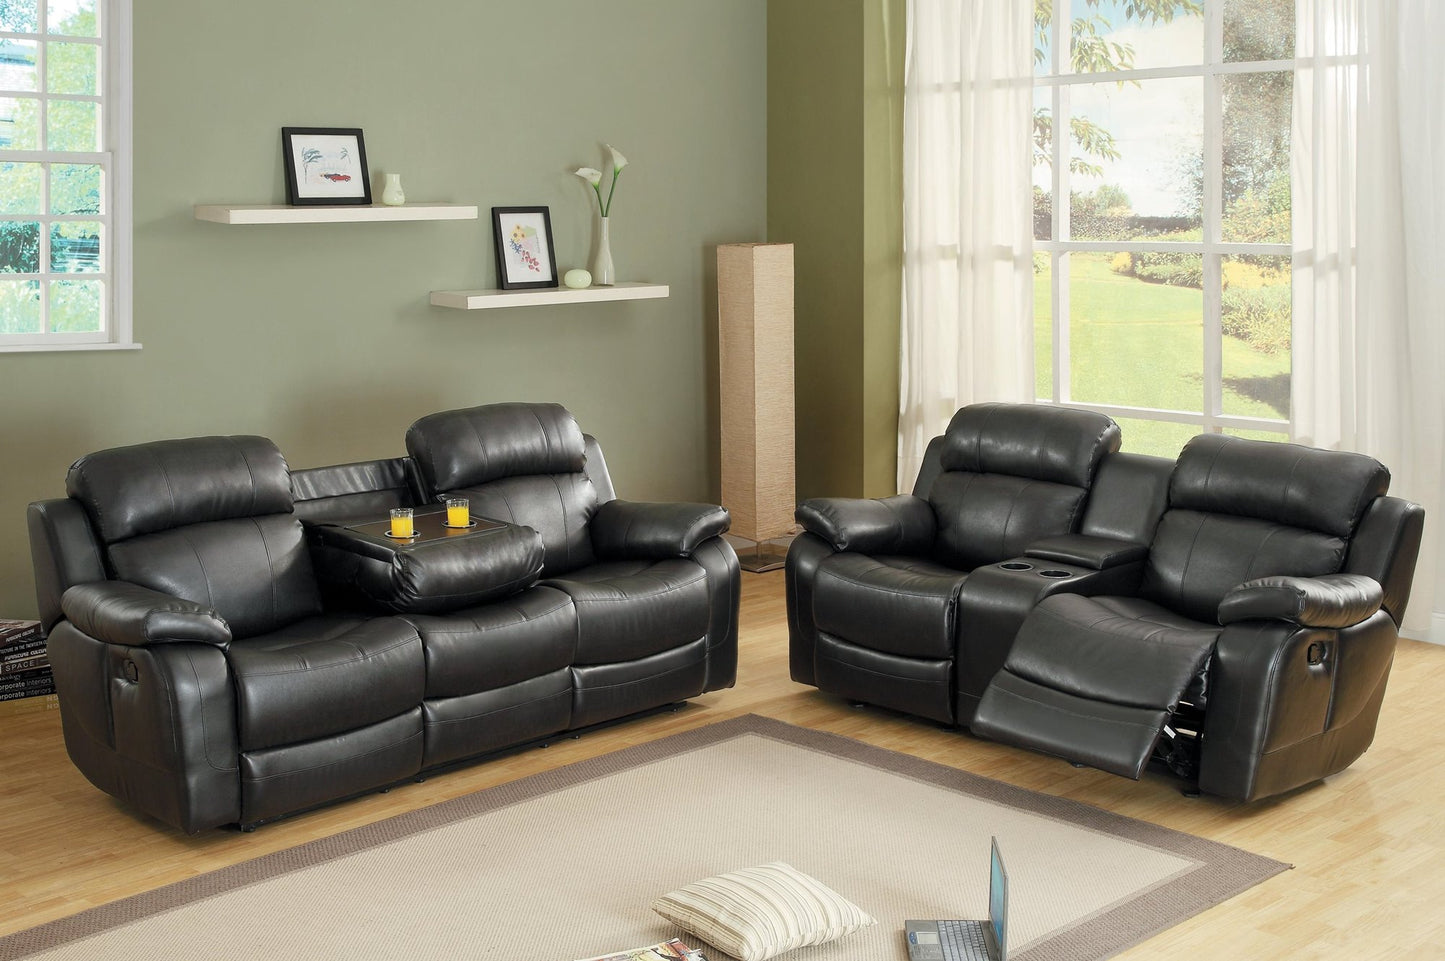 Homelegance Marille2PC Set Double Reclining Sofa & Love Seat with Console in Leather - Black